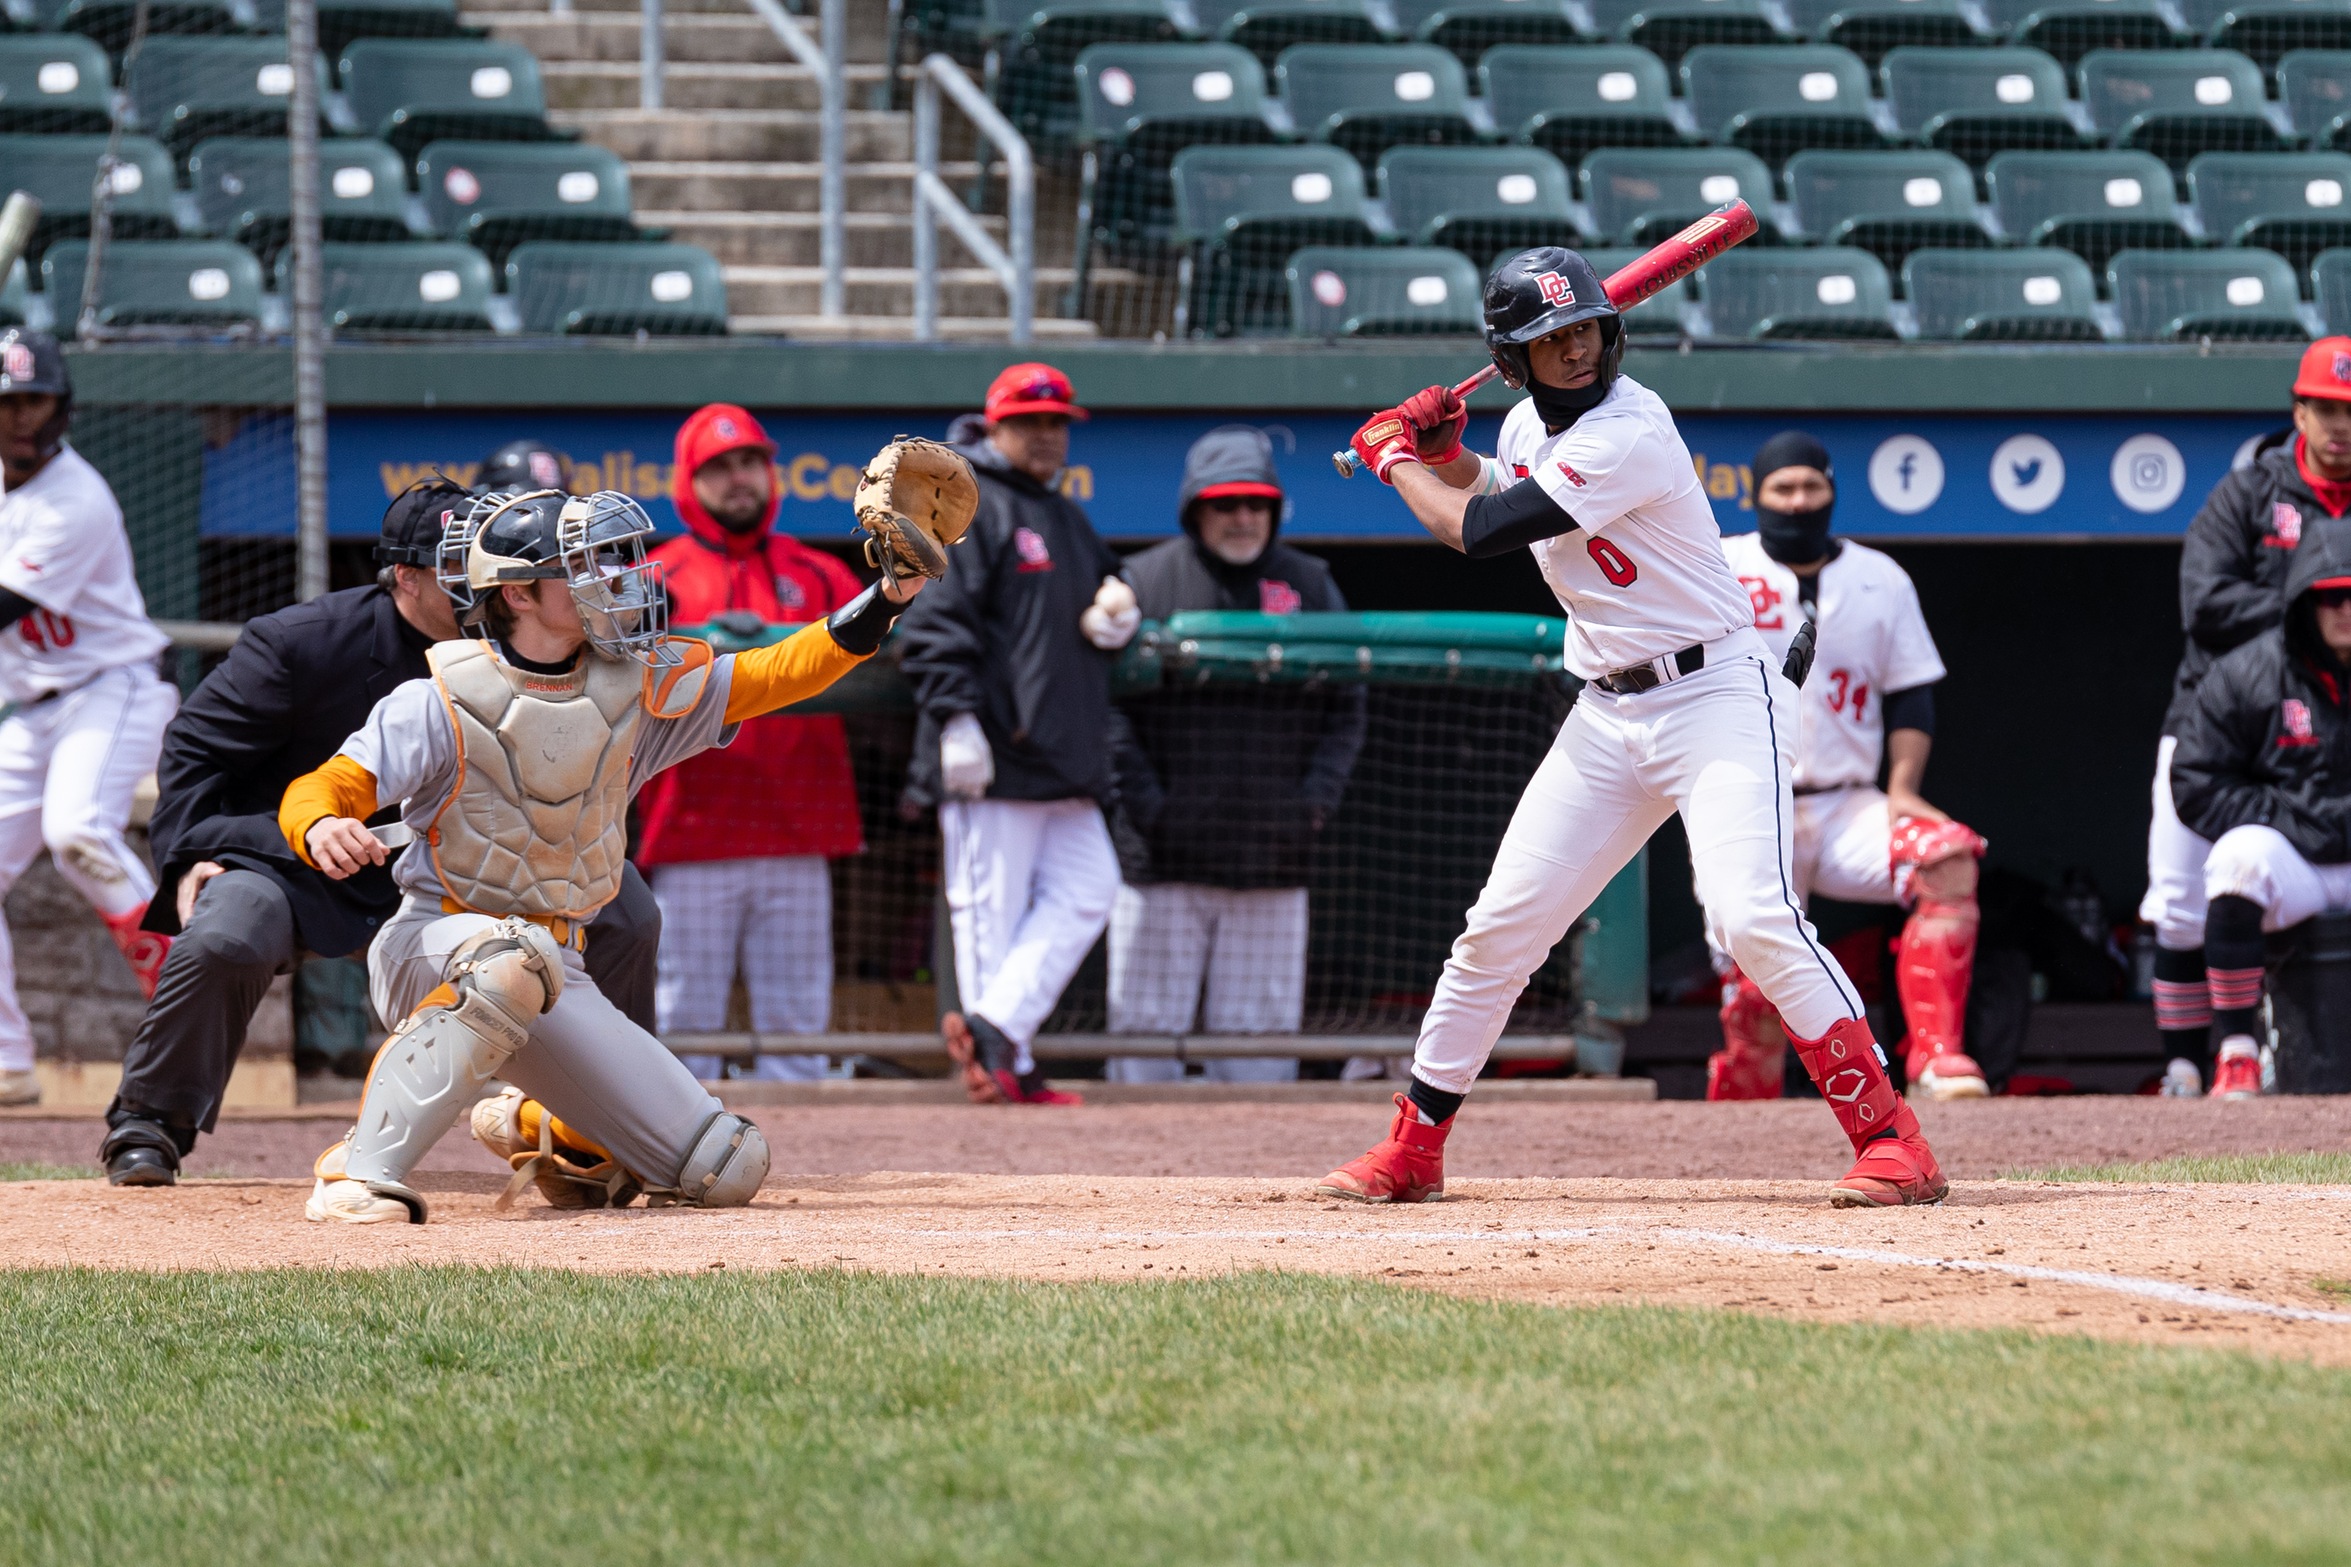 D'YOUVILLE TAKES TWO FROM DOMINICAN